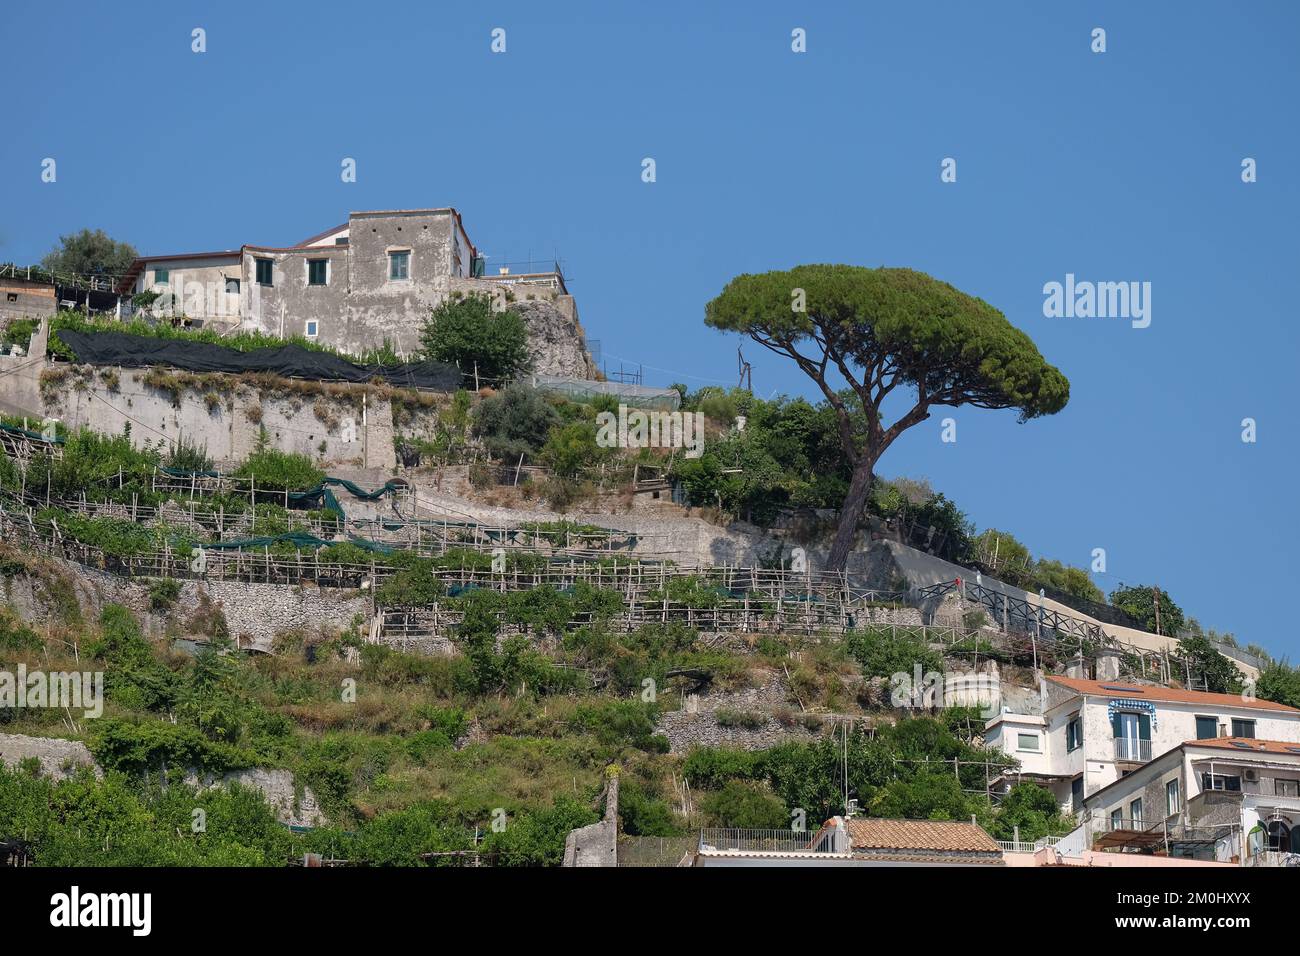 A view of a cliffside property with steep garden growing produce( most properly lemons) above Amalfi town Italy. Stock Photo